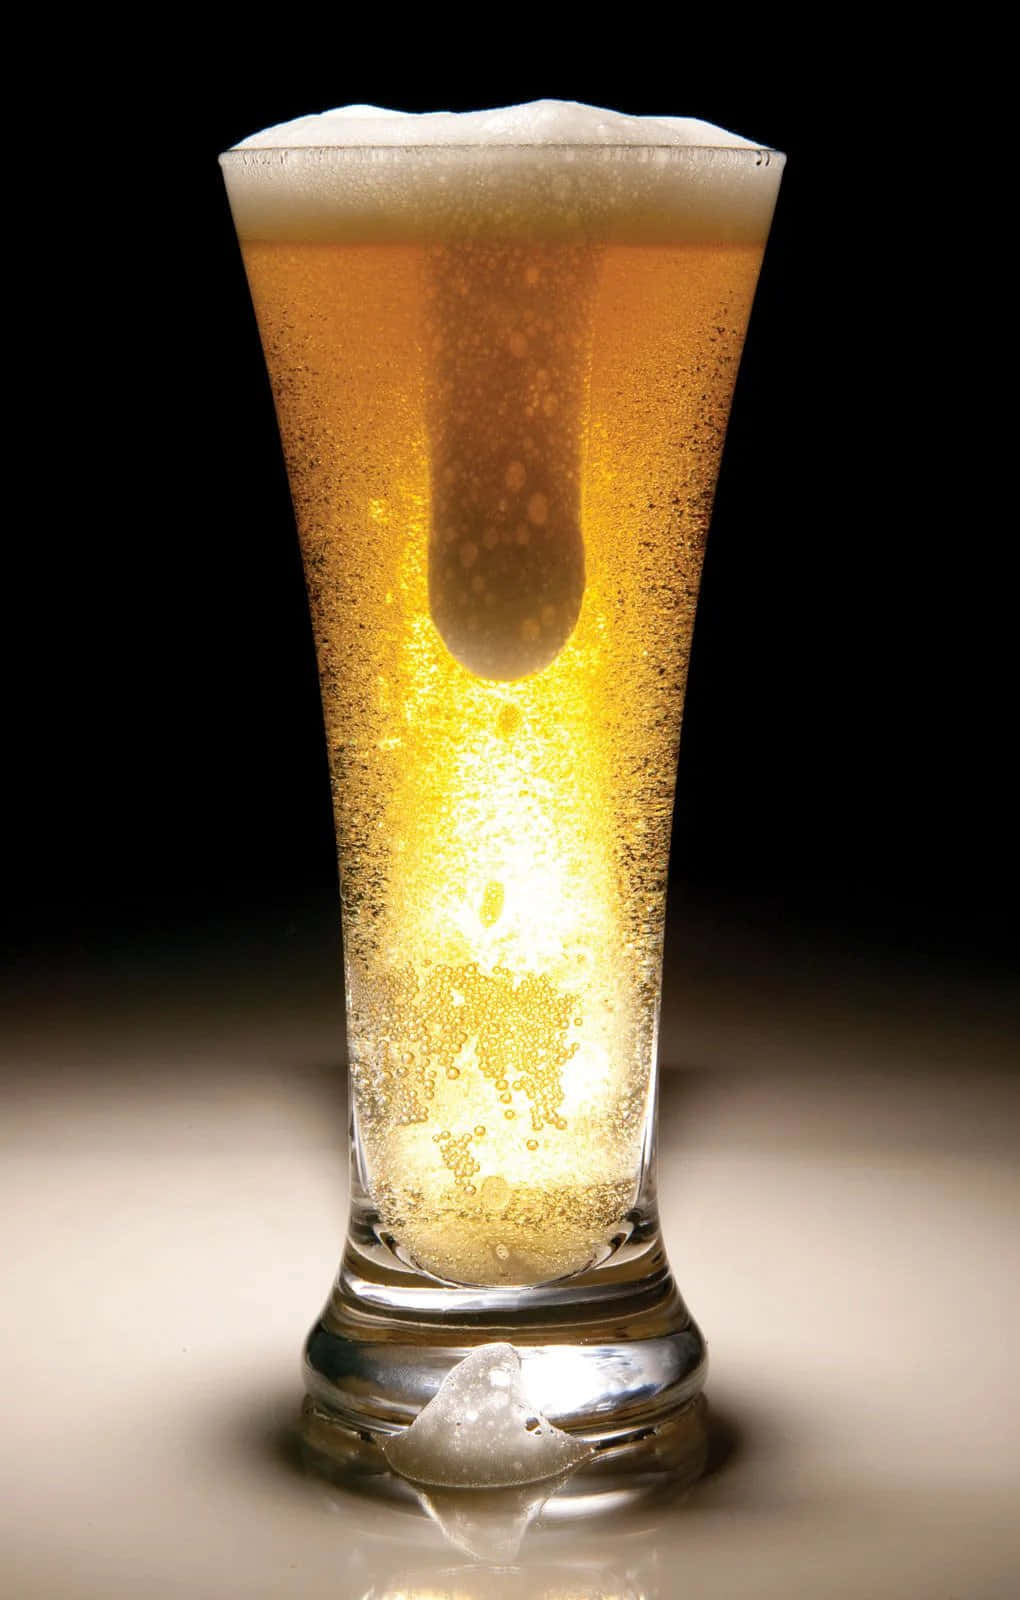 Enjoy a Chilled Beer